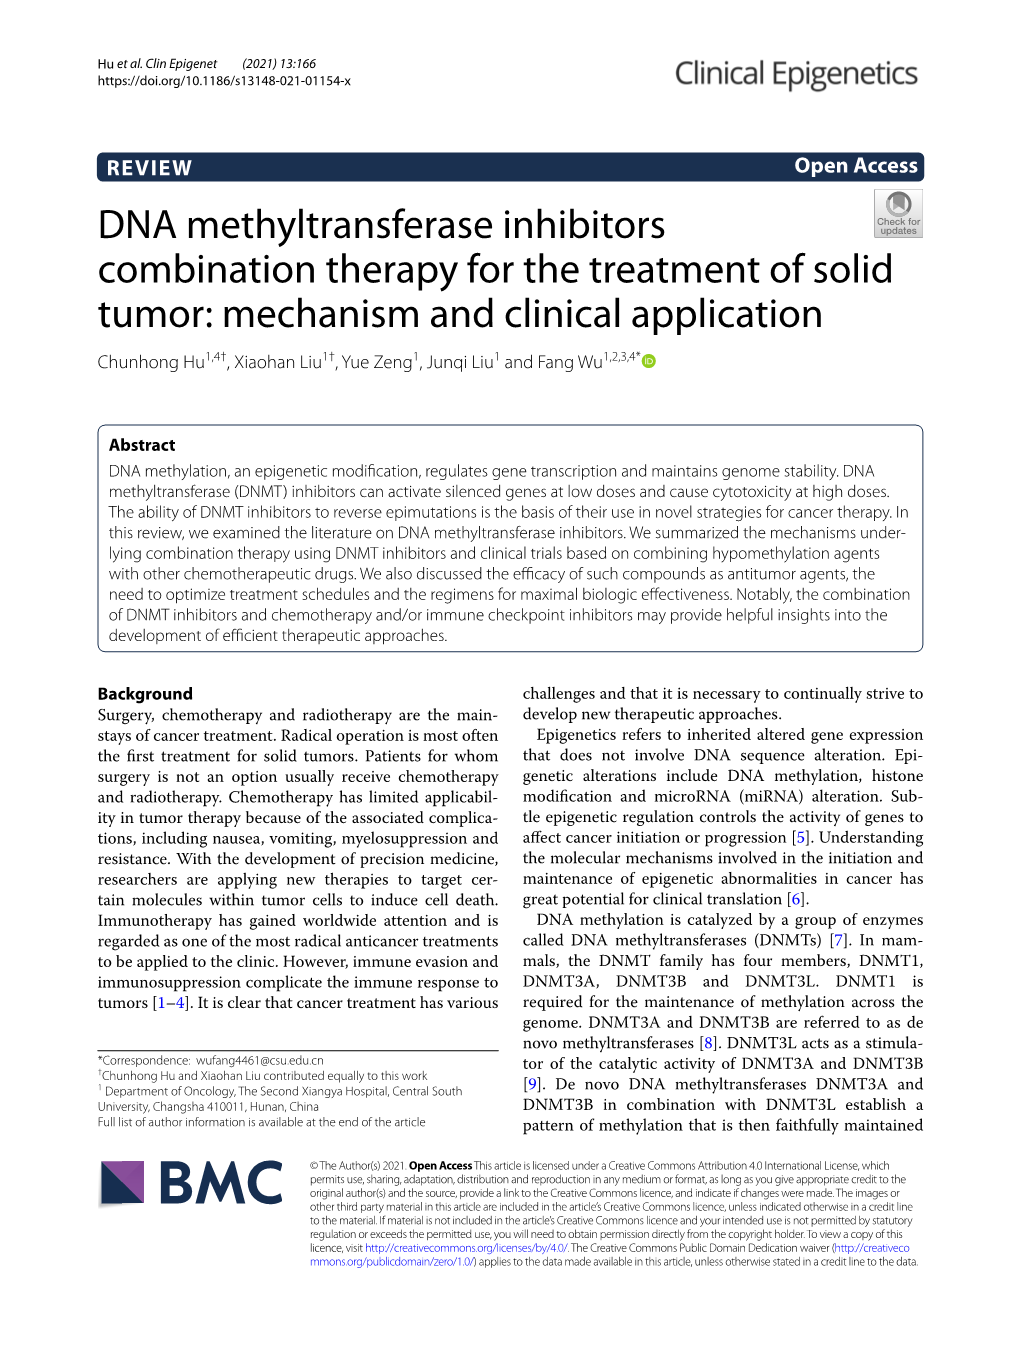 DNA Methyltransferase Inhibitors Combination Therapy for The